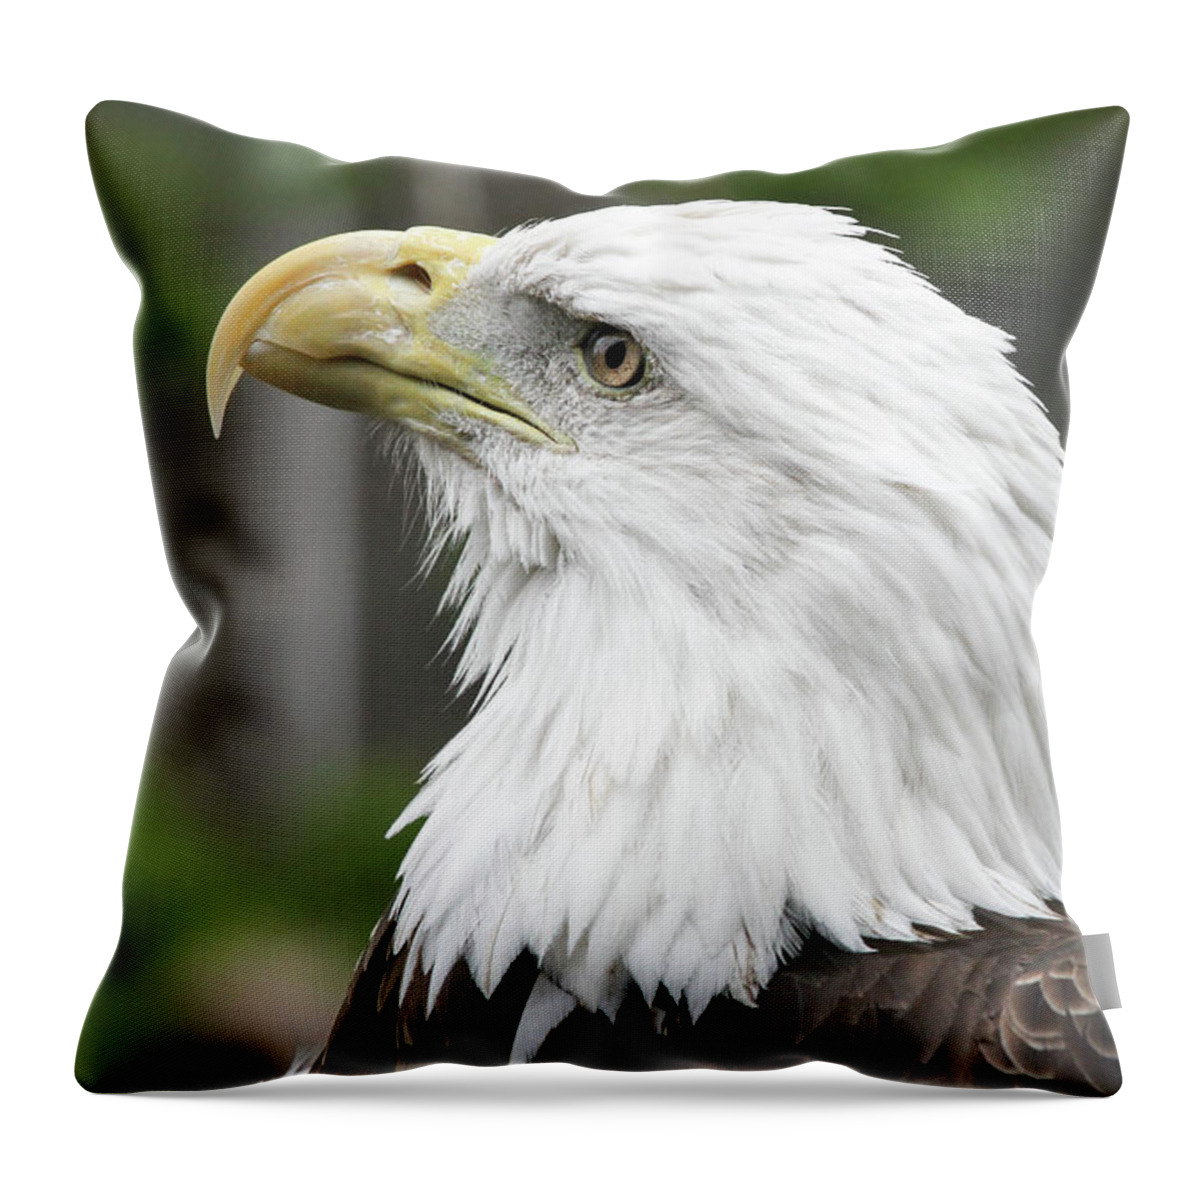 Eagle Throw Pillow featuring the photograph Bald Eagle by Jackson Pearson